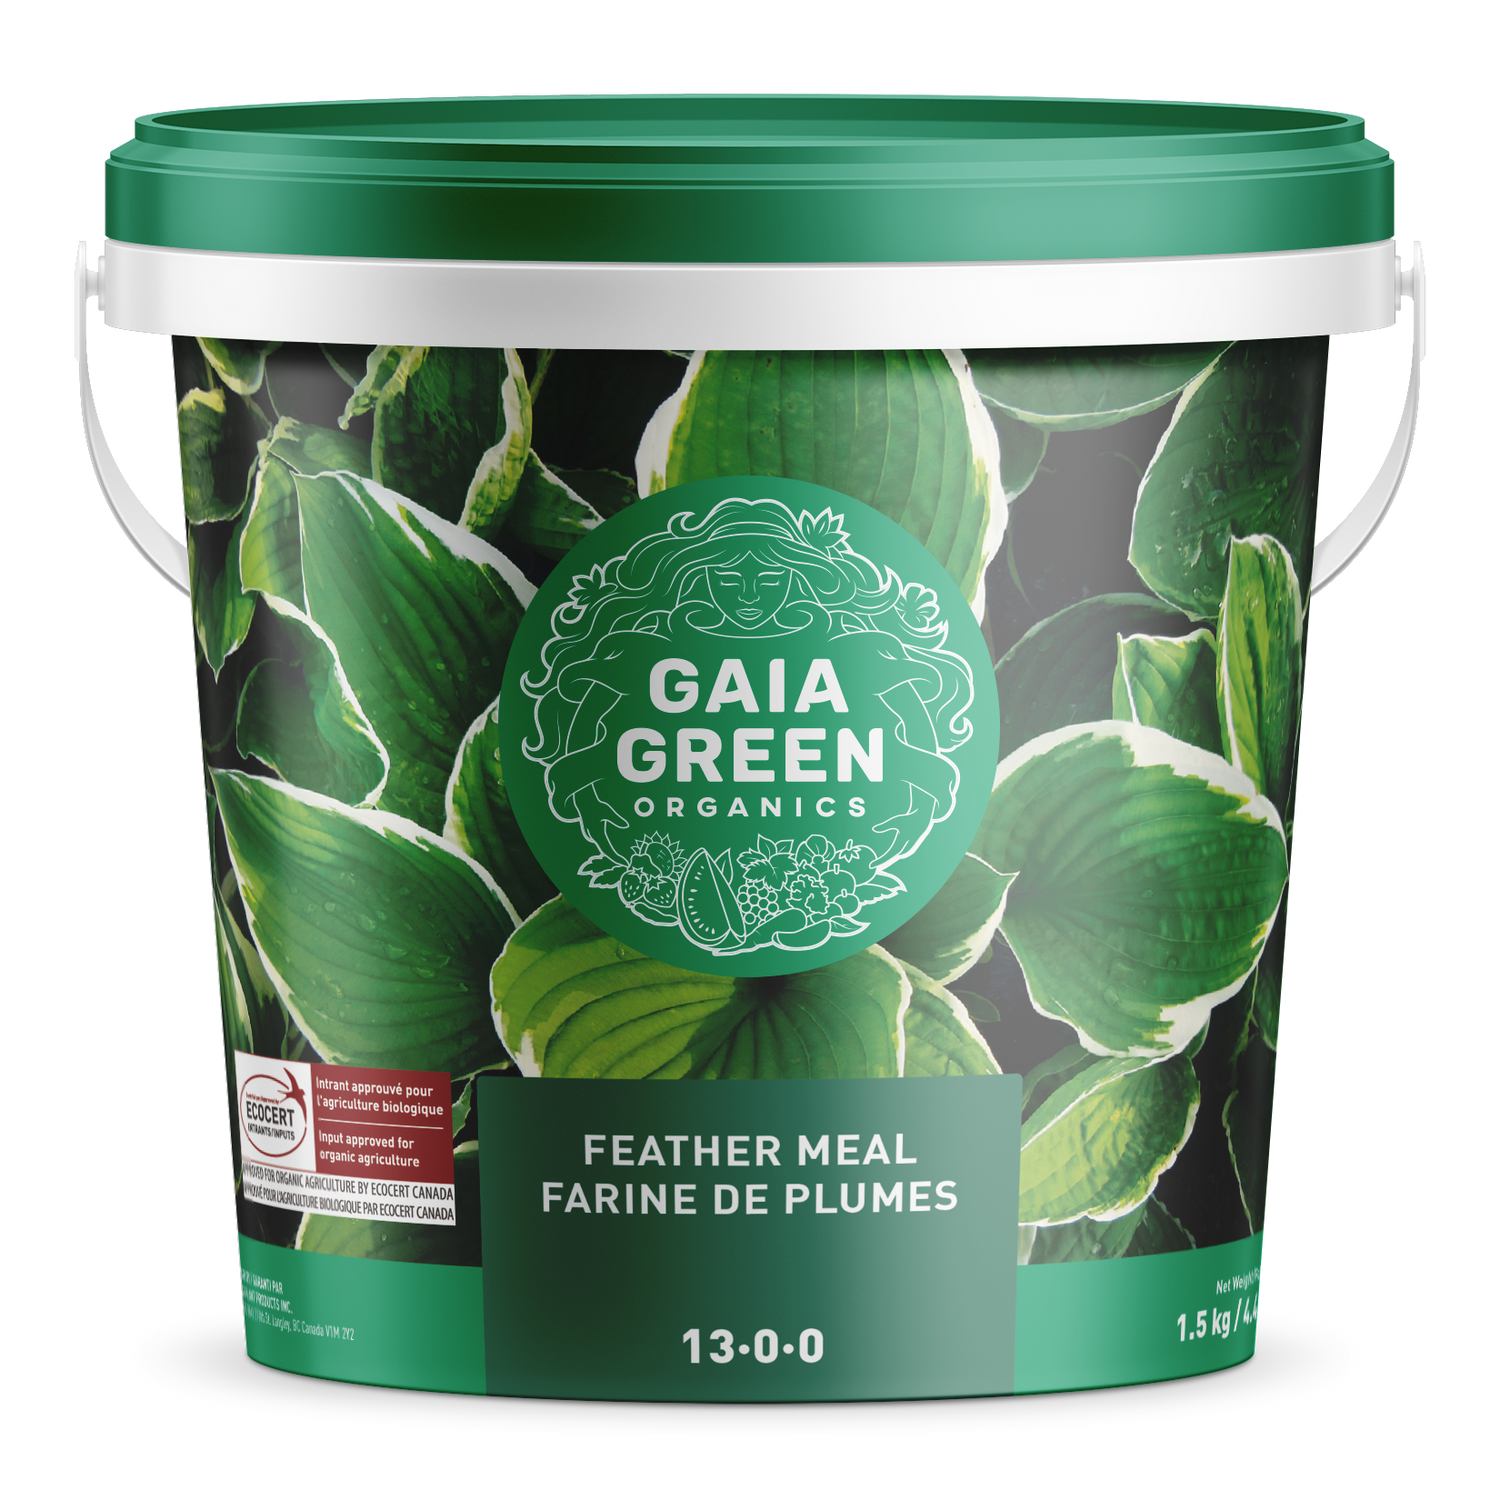 Gaia Green Feather Meal 13-0-0